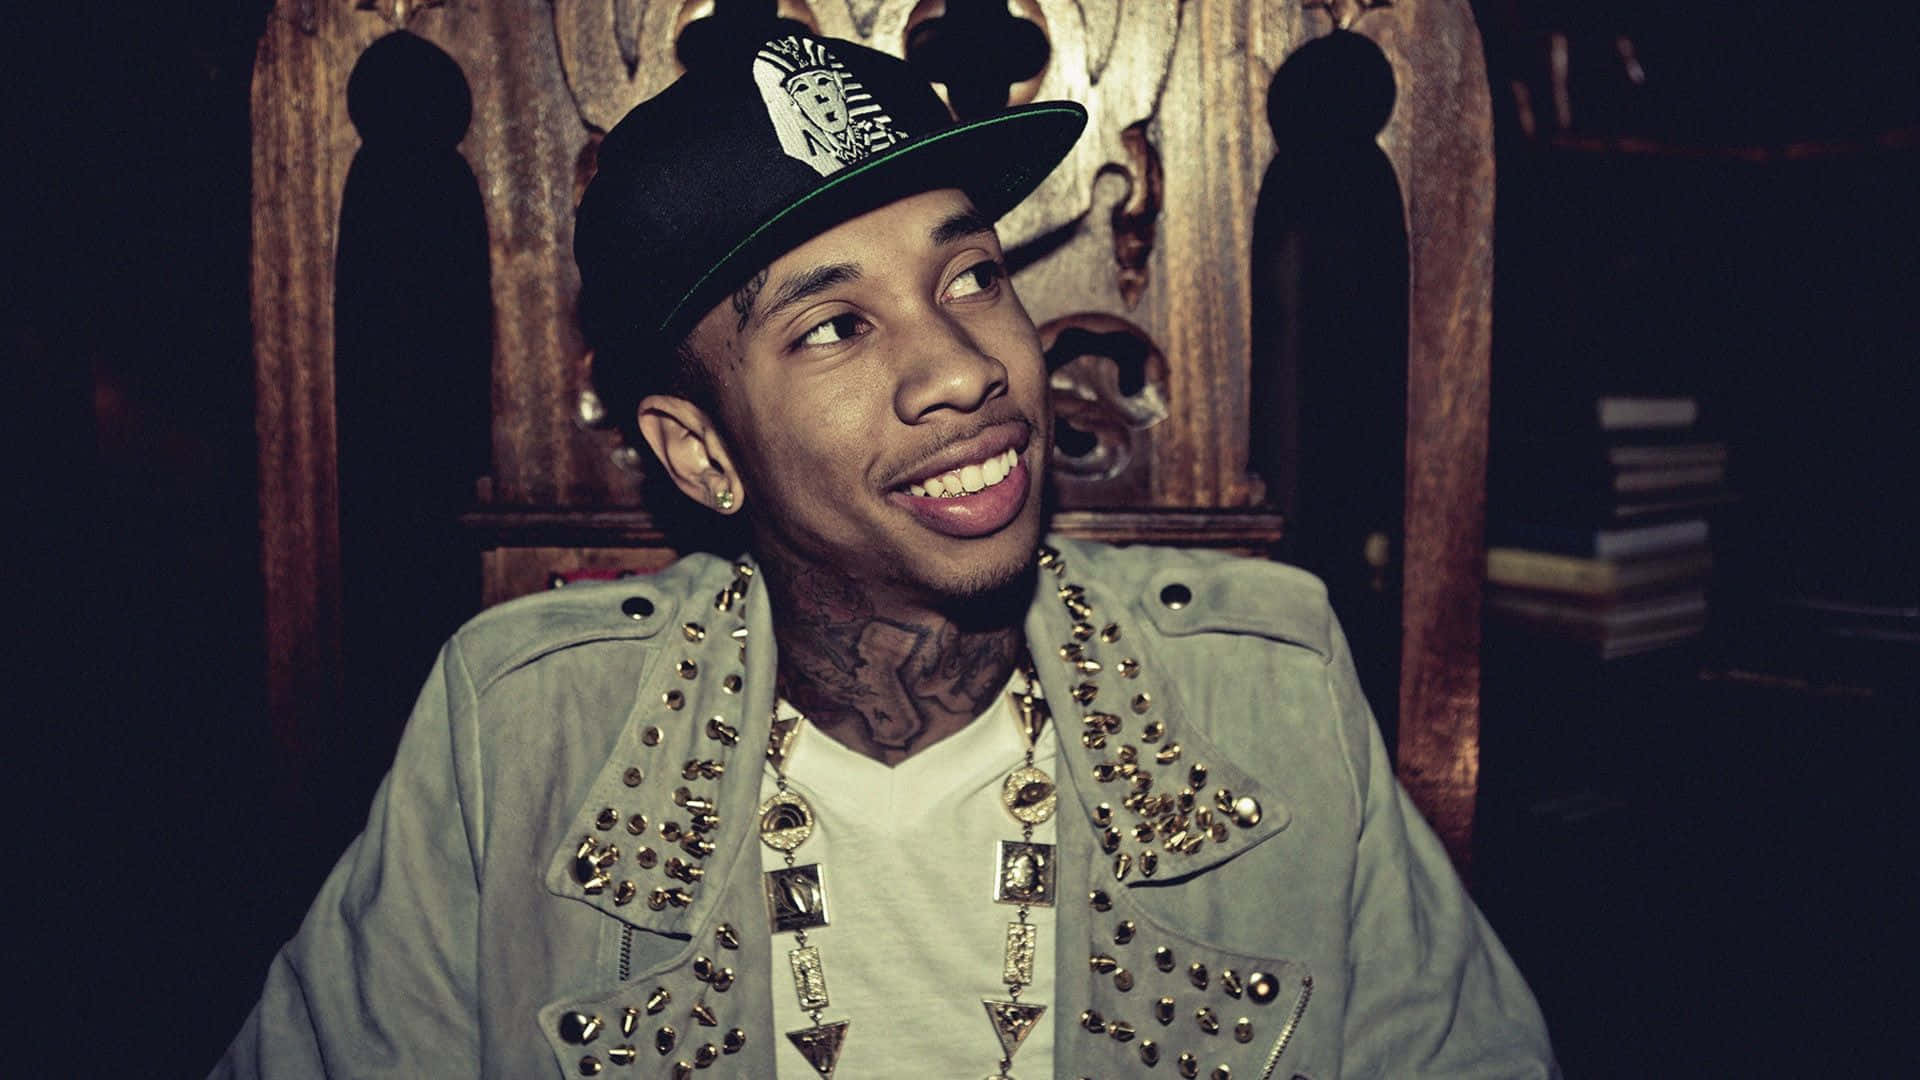 Powering Up: Hip Hop Artist Tyga Gets Lost in His Music Wallpaper